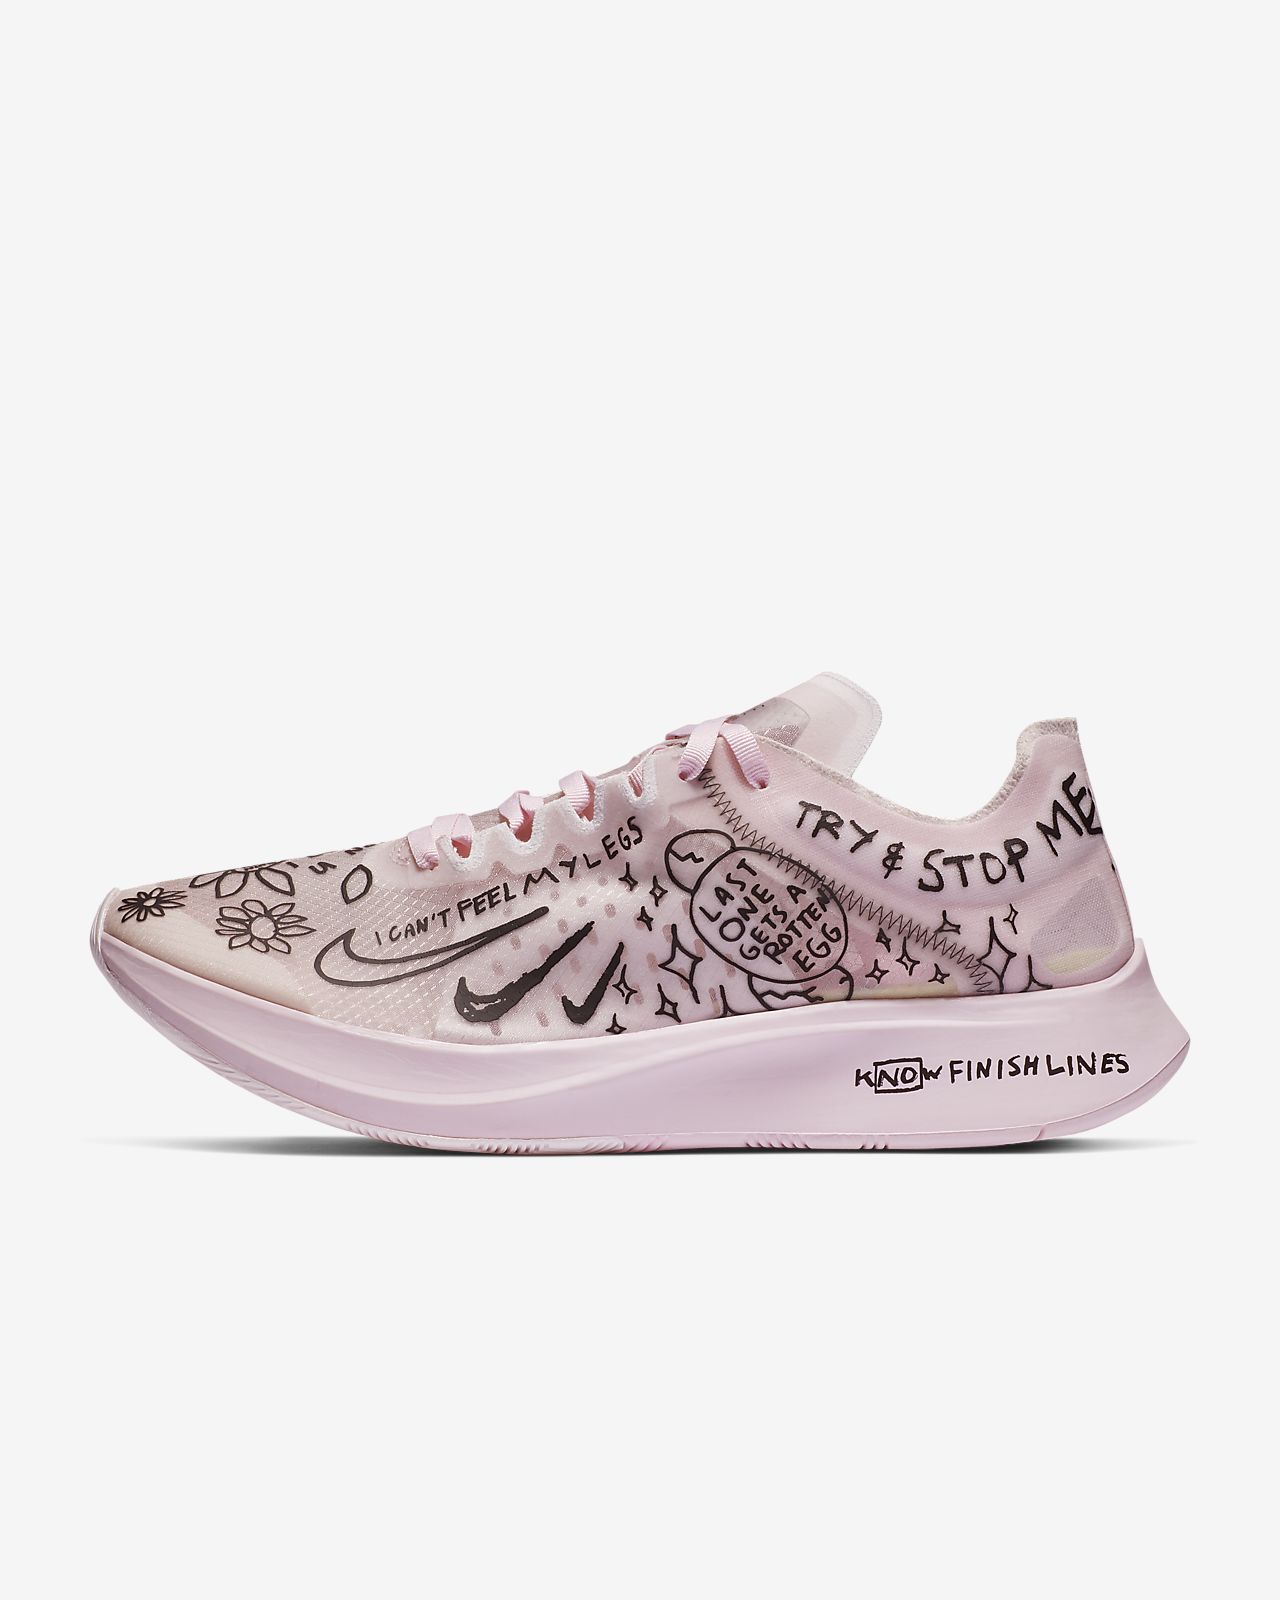 nike fly zoom pink